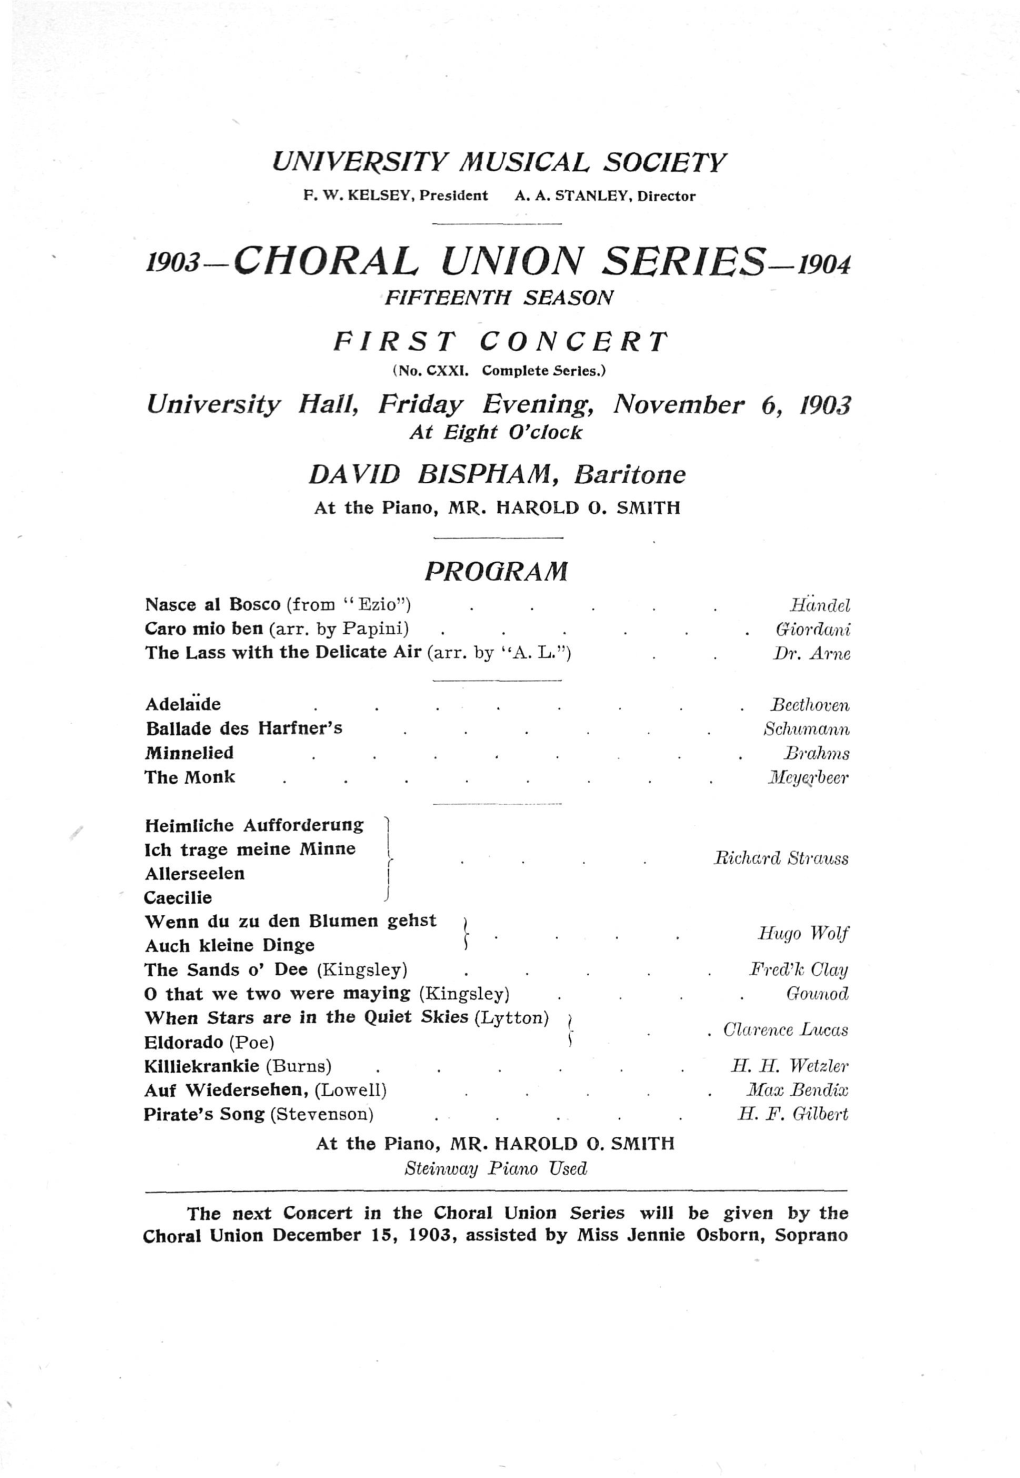 I903-CHORAL UNION SERIES-1904 FIFTEENTH SEASON FIRST CONCERT (No